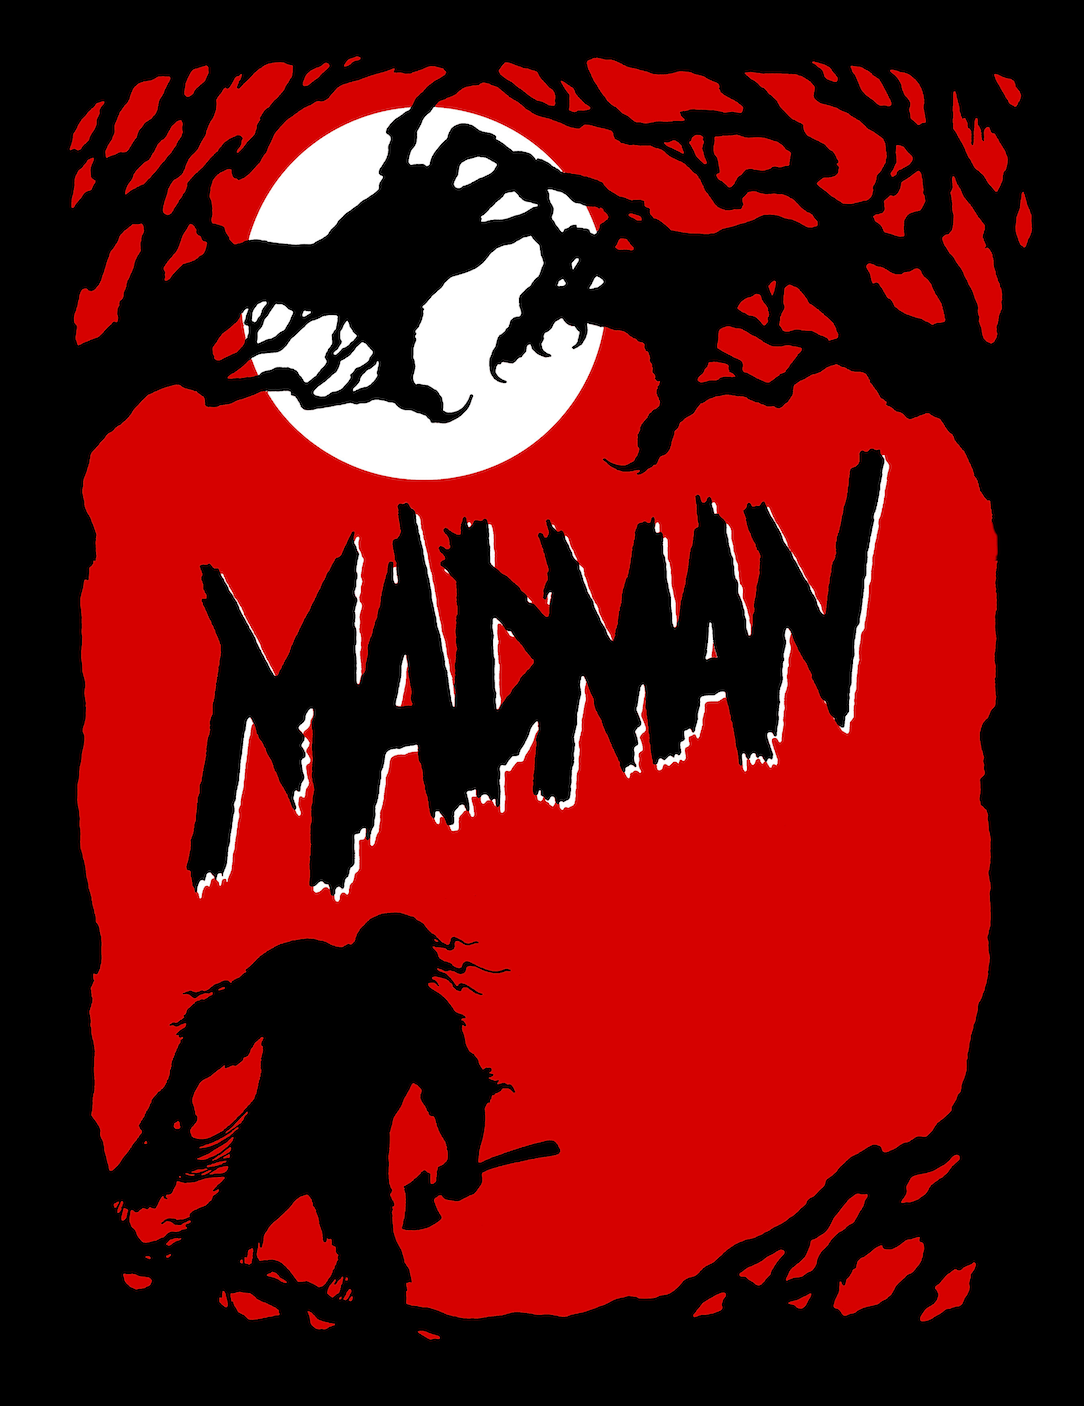 Limited Edition Madman Poster (original key art) illustrated by Paul Ehlers